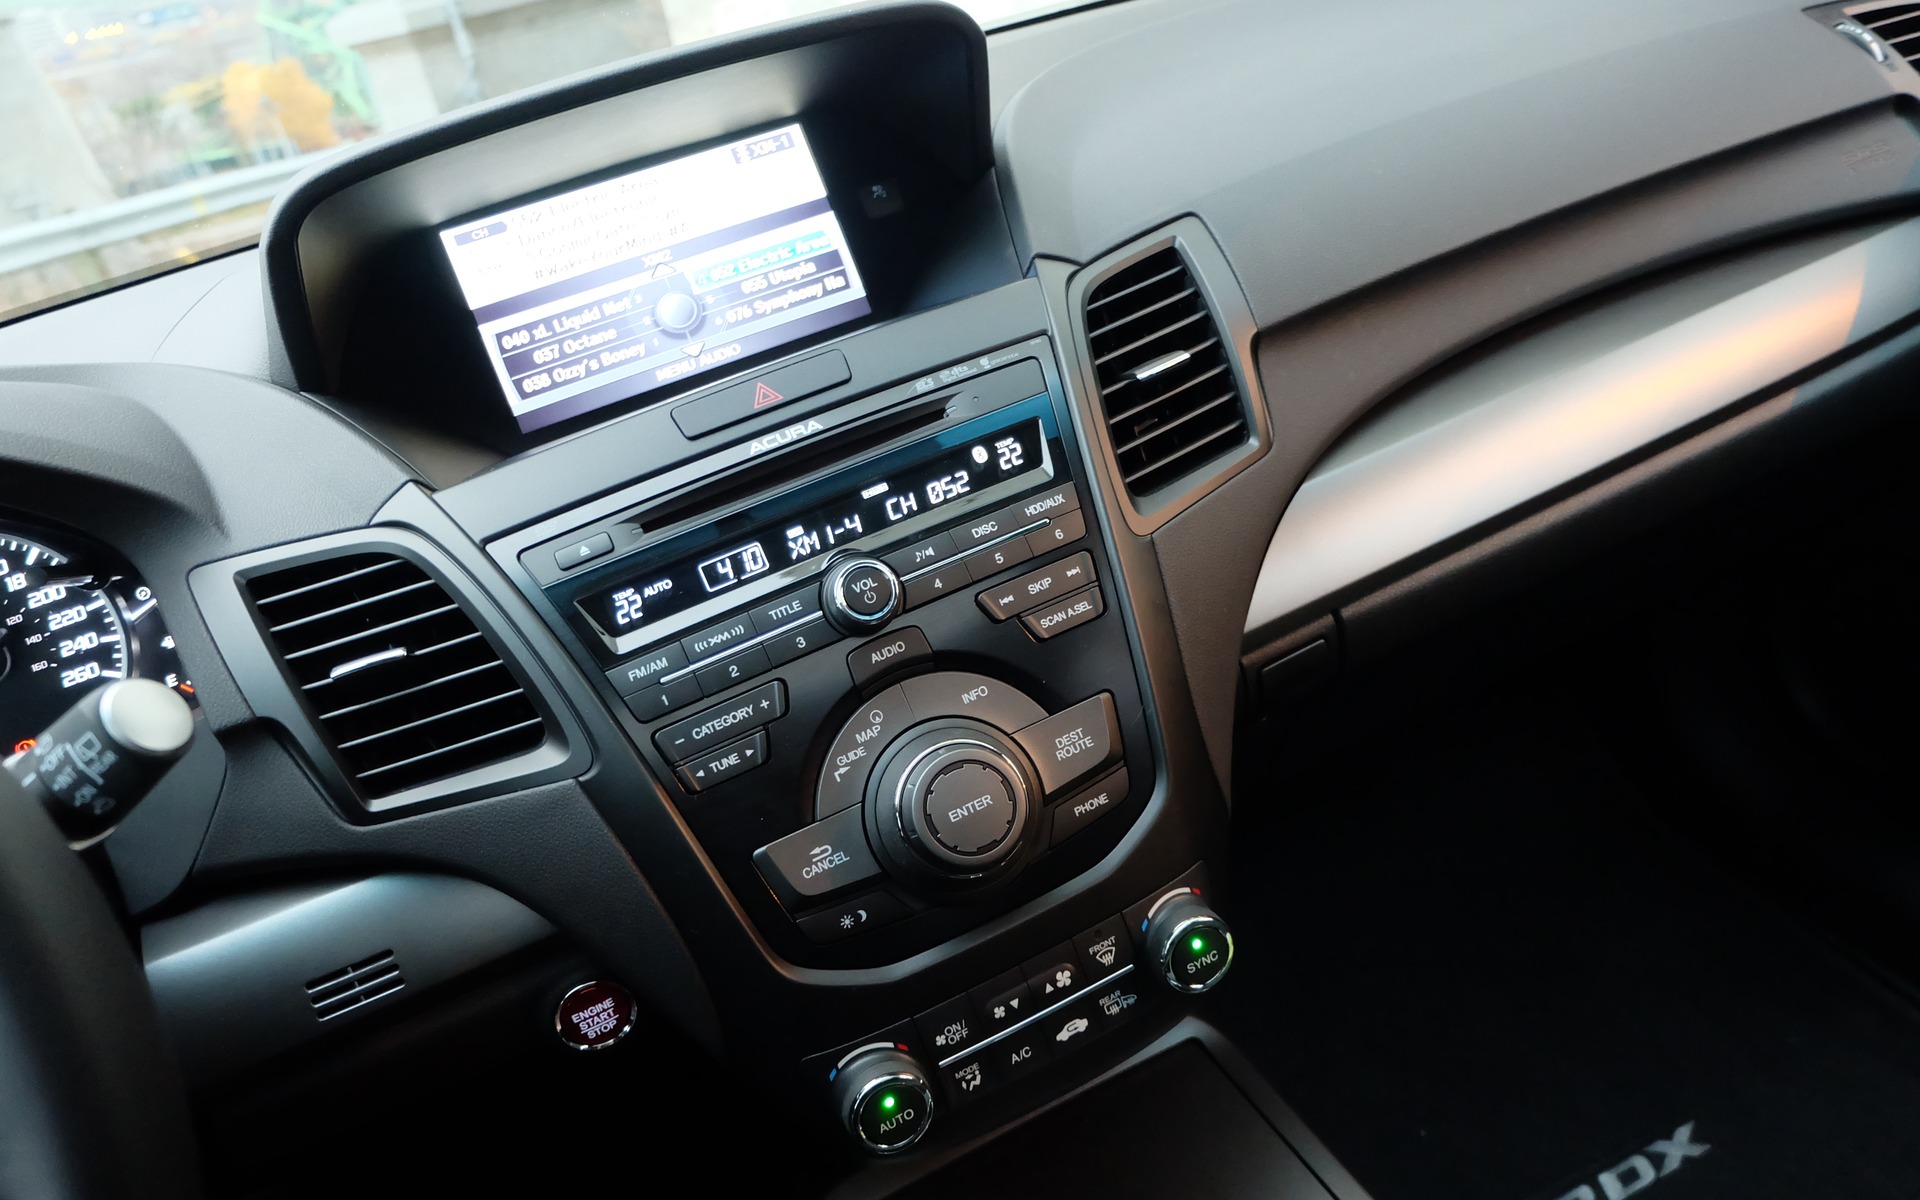 The Technology Package includes both an eight-inch screen and GPS.